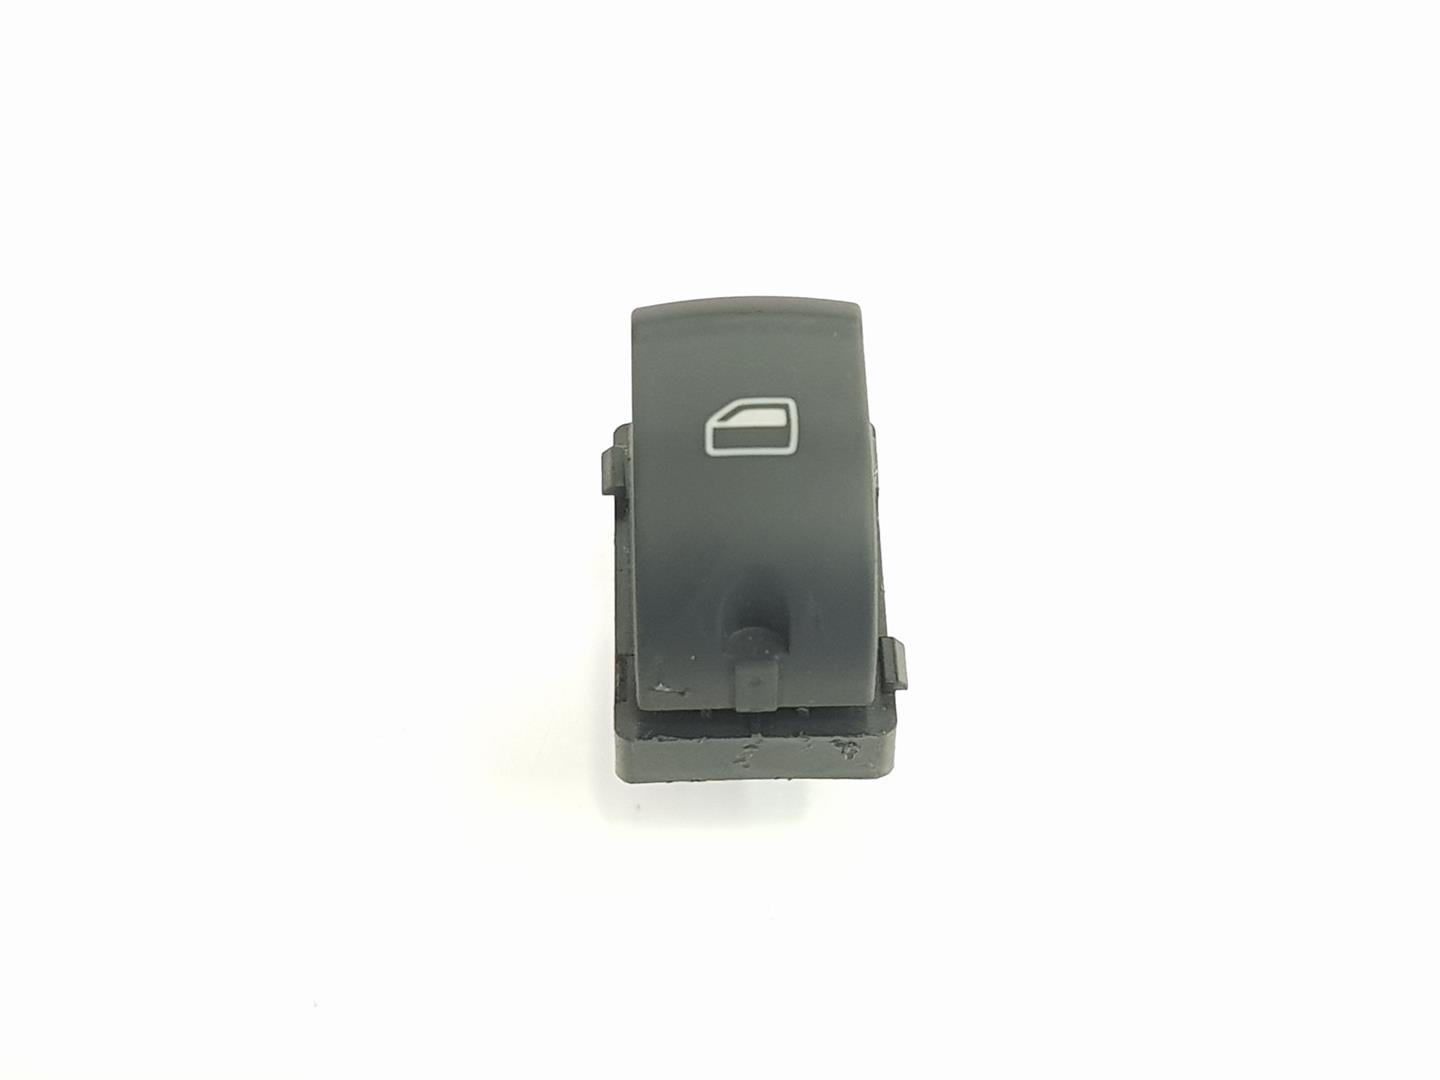 AUDI A6 C6/4F (2004-2011) Front Right Door Window Switch 4F0959855, 4F0959855 19764430